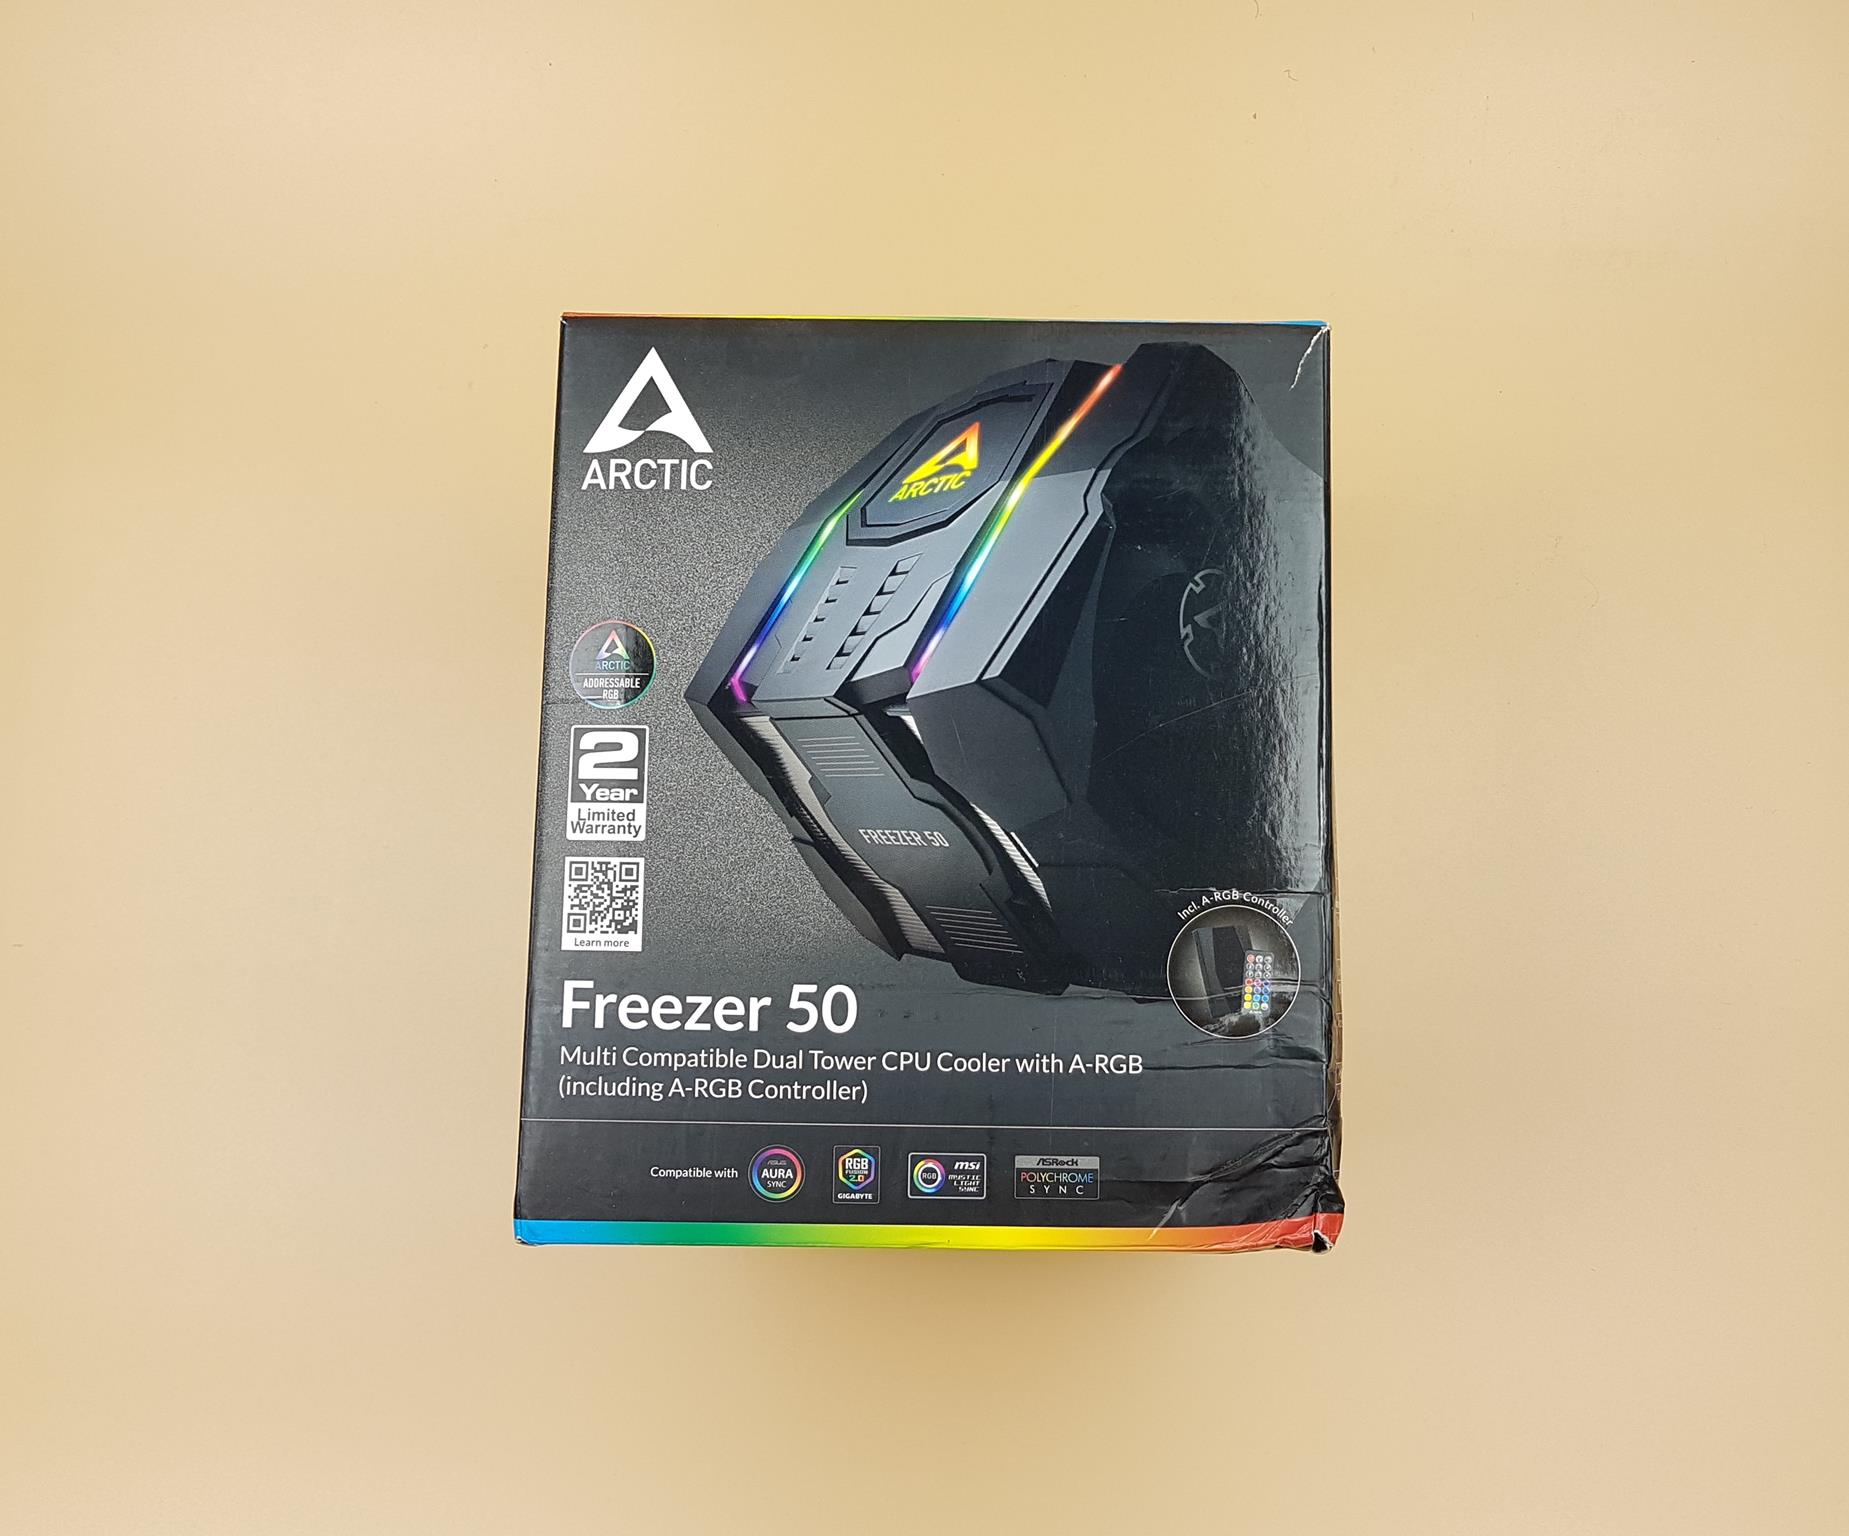 arctic freezer 50 Packing and Unboxing